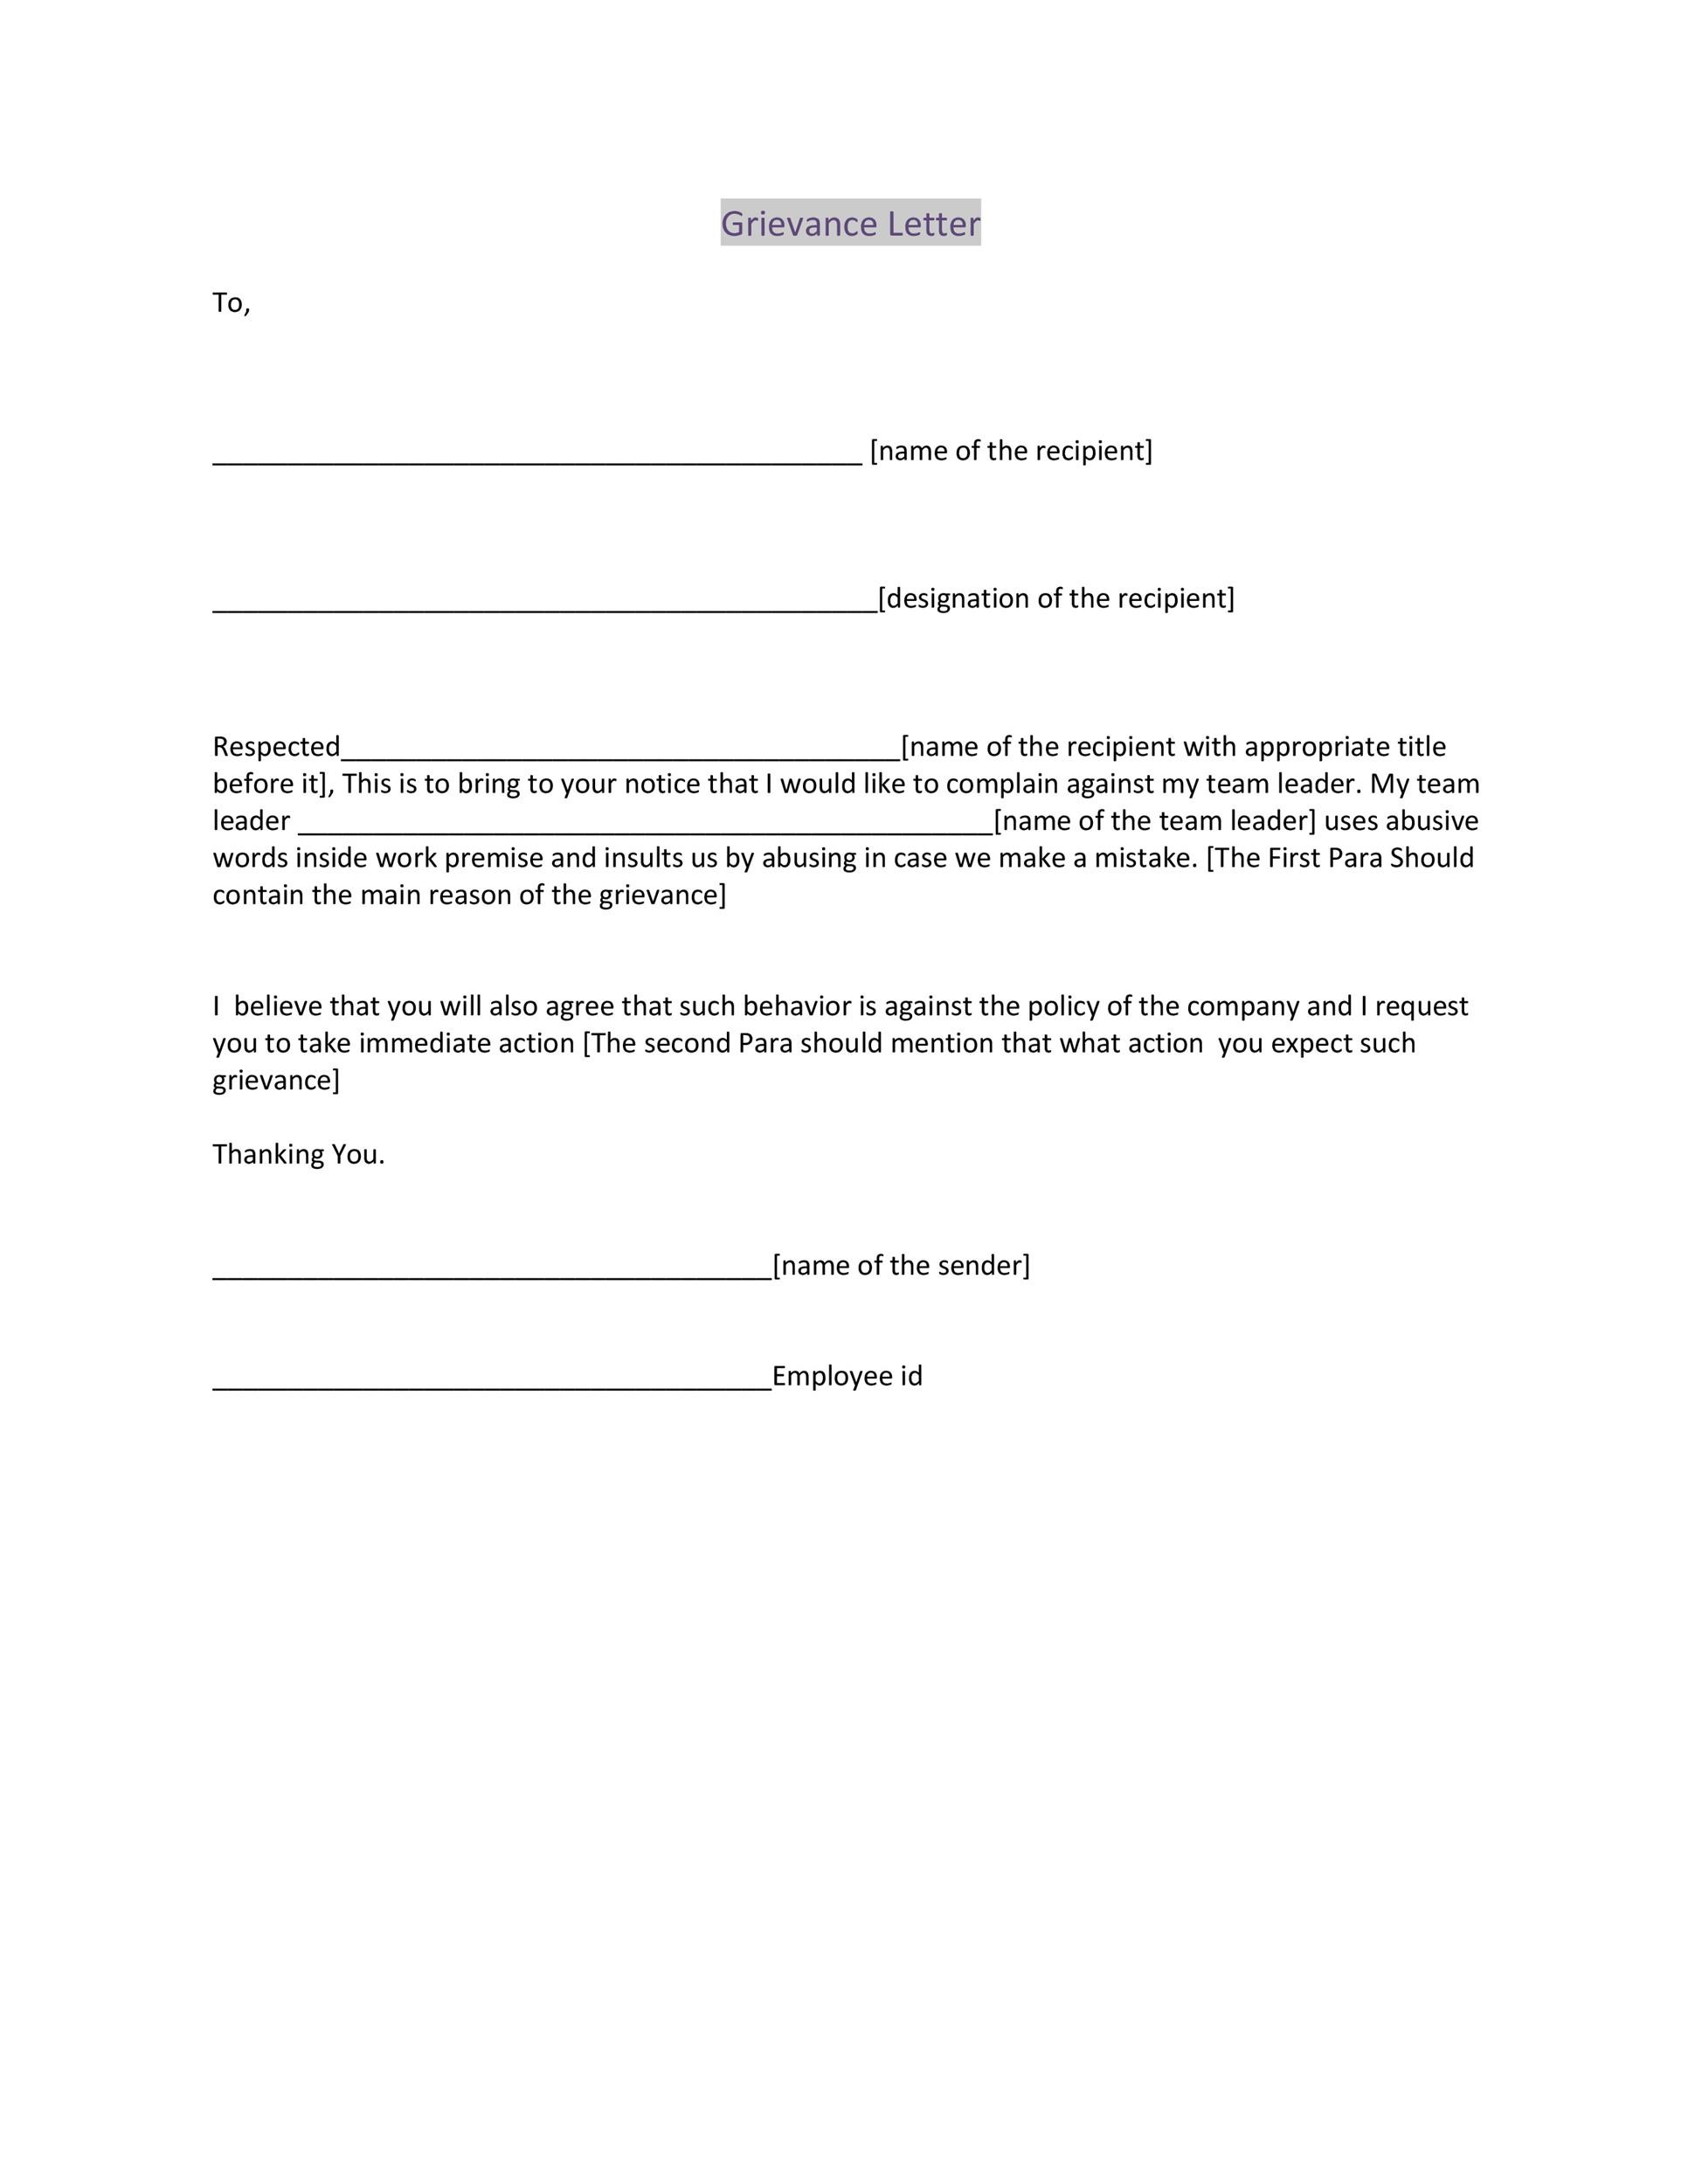 Complaint Letter Template from templatelab.com